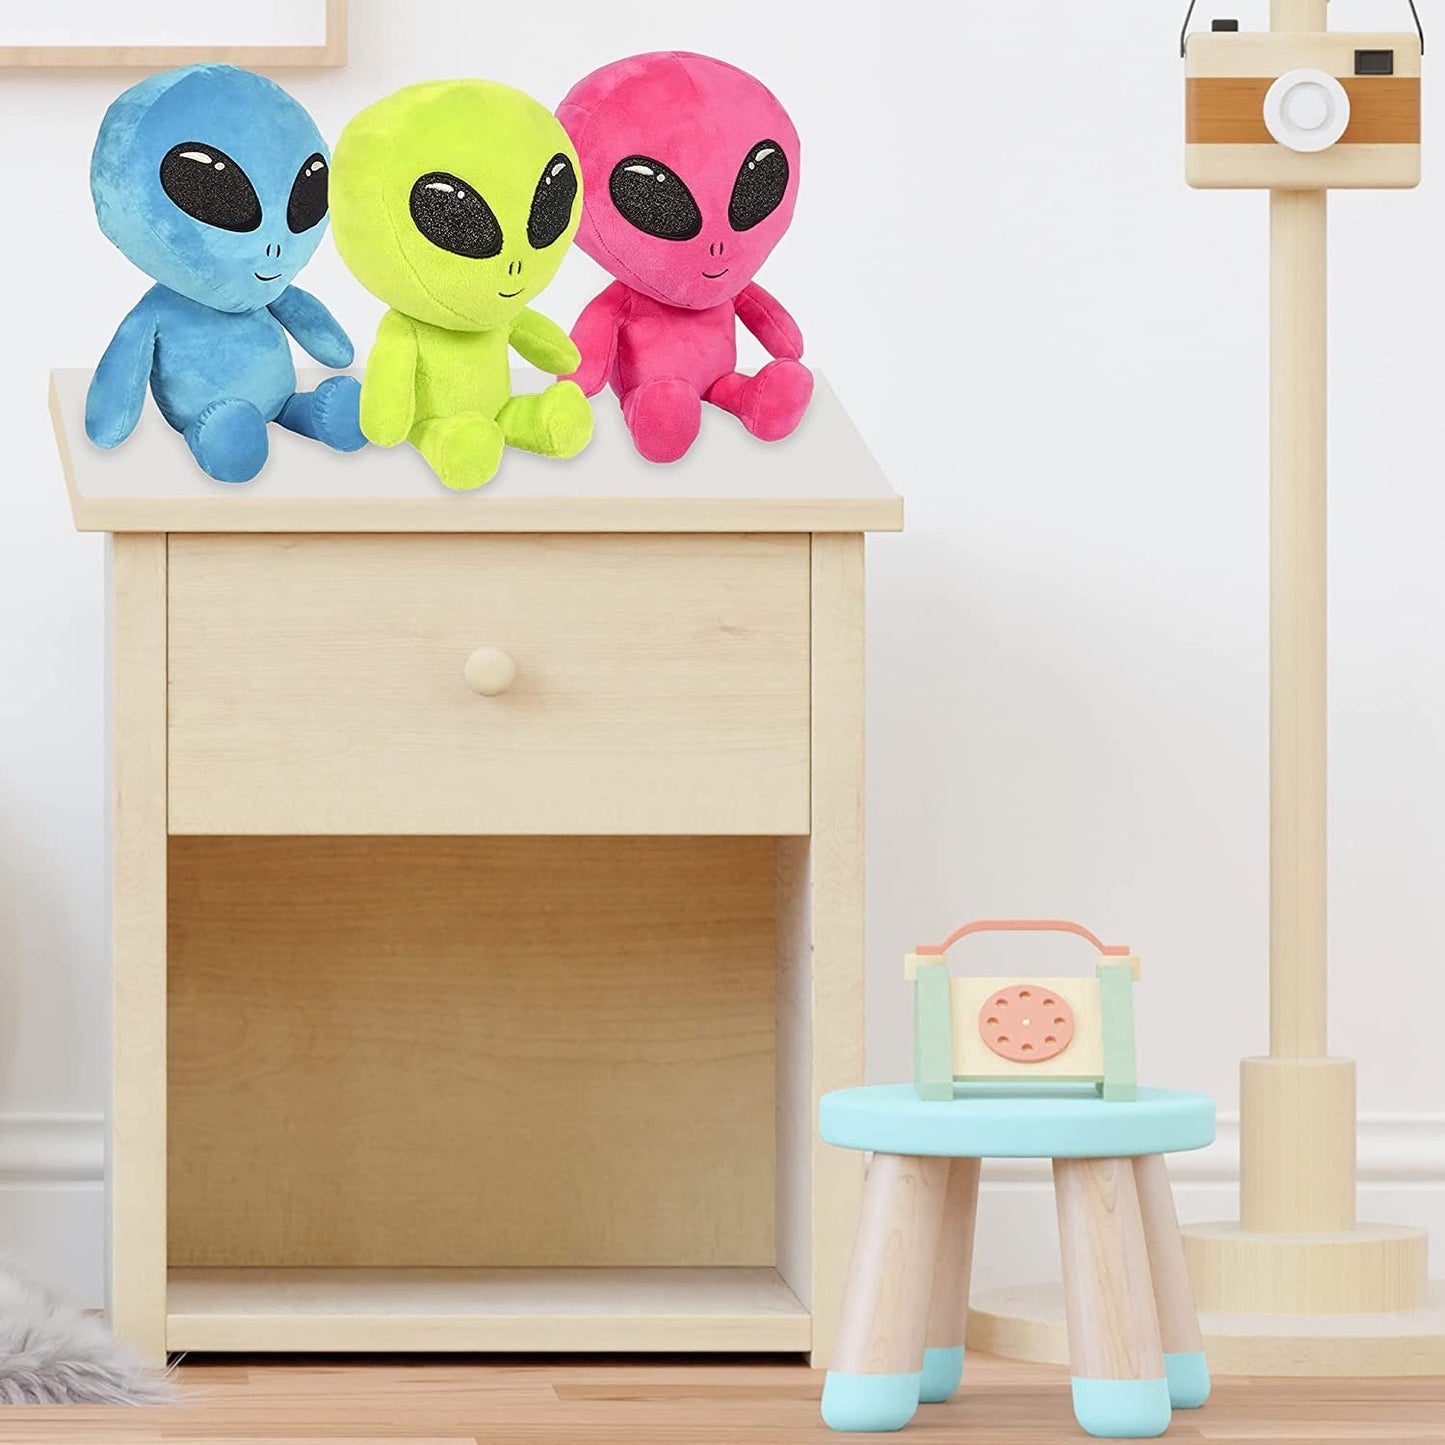 ArtCreativity Plush Alien Stuffed Toys for Kids, Set of 3, Super Soft Stuffed Space Toys in Vibrant Colors, Galaxy Party Decorations, Outer Space Party Favors, Huggable Space Alien Gifts for Kids